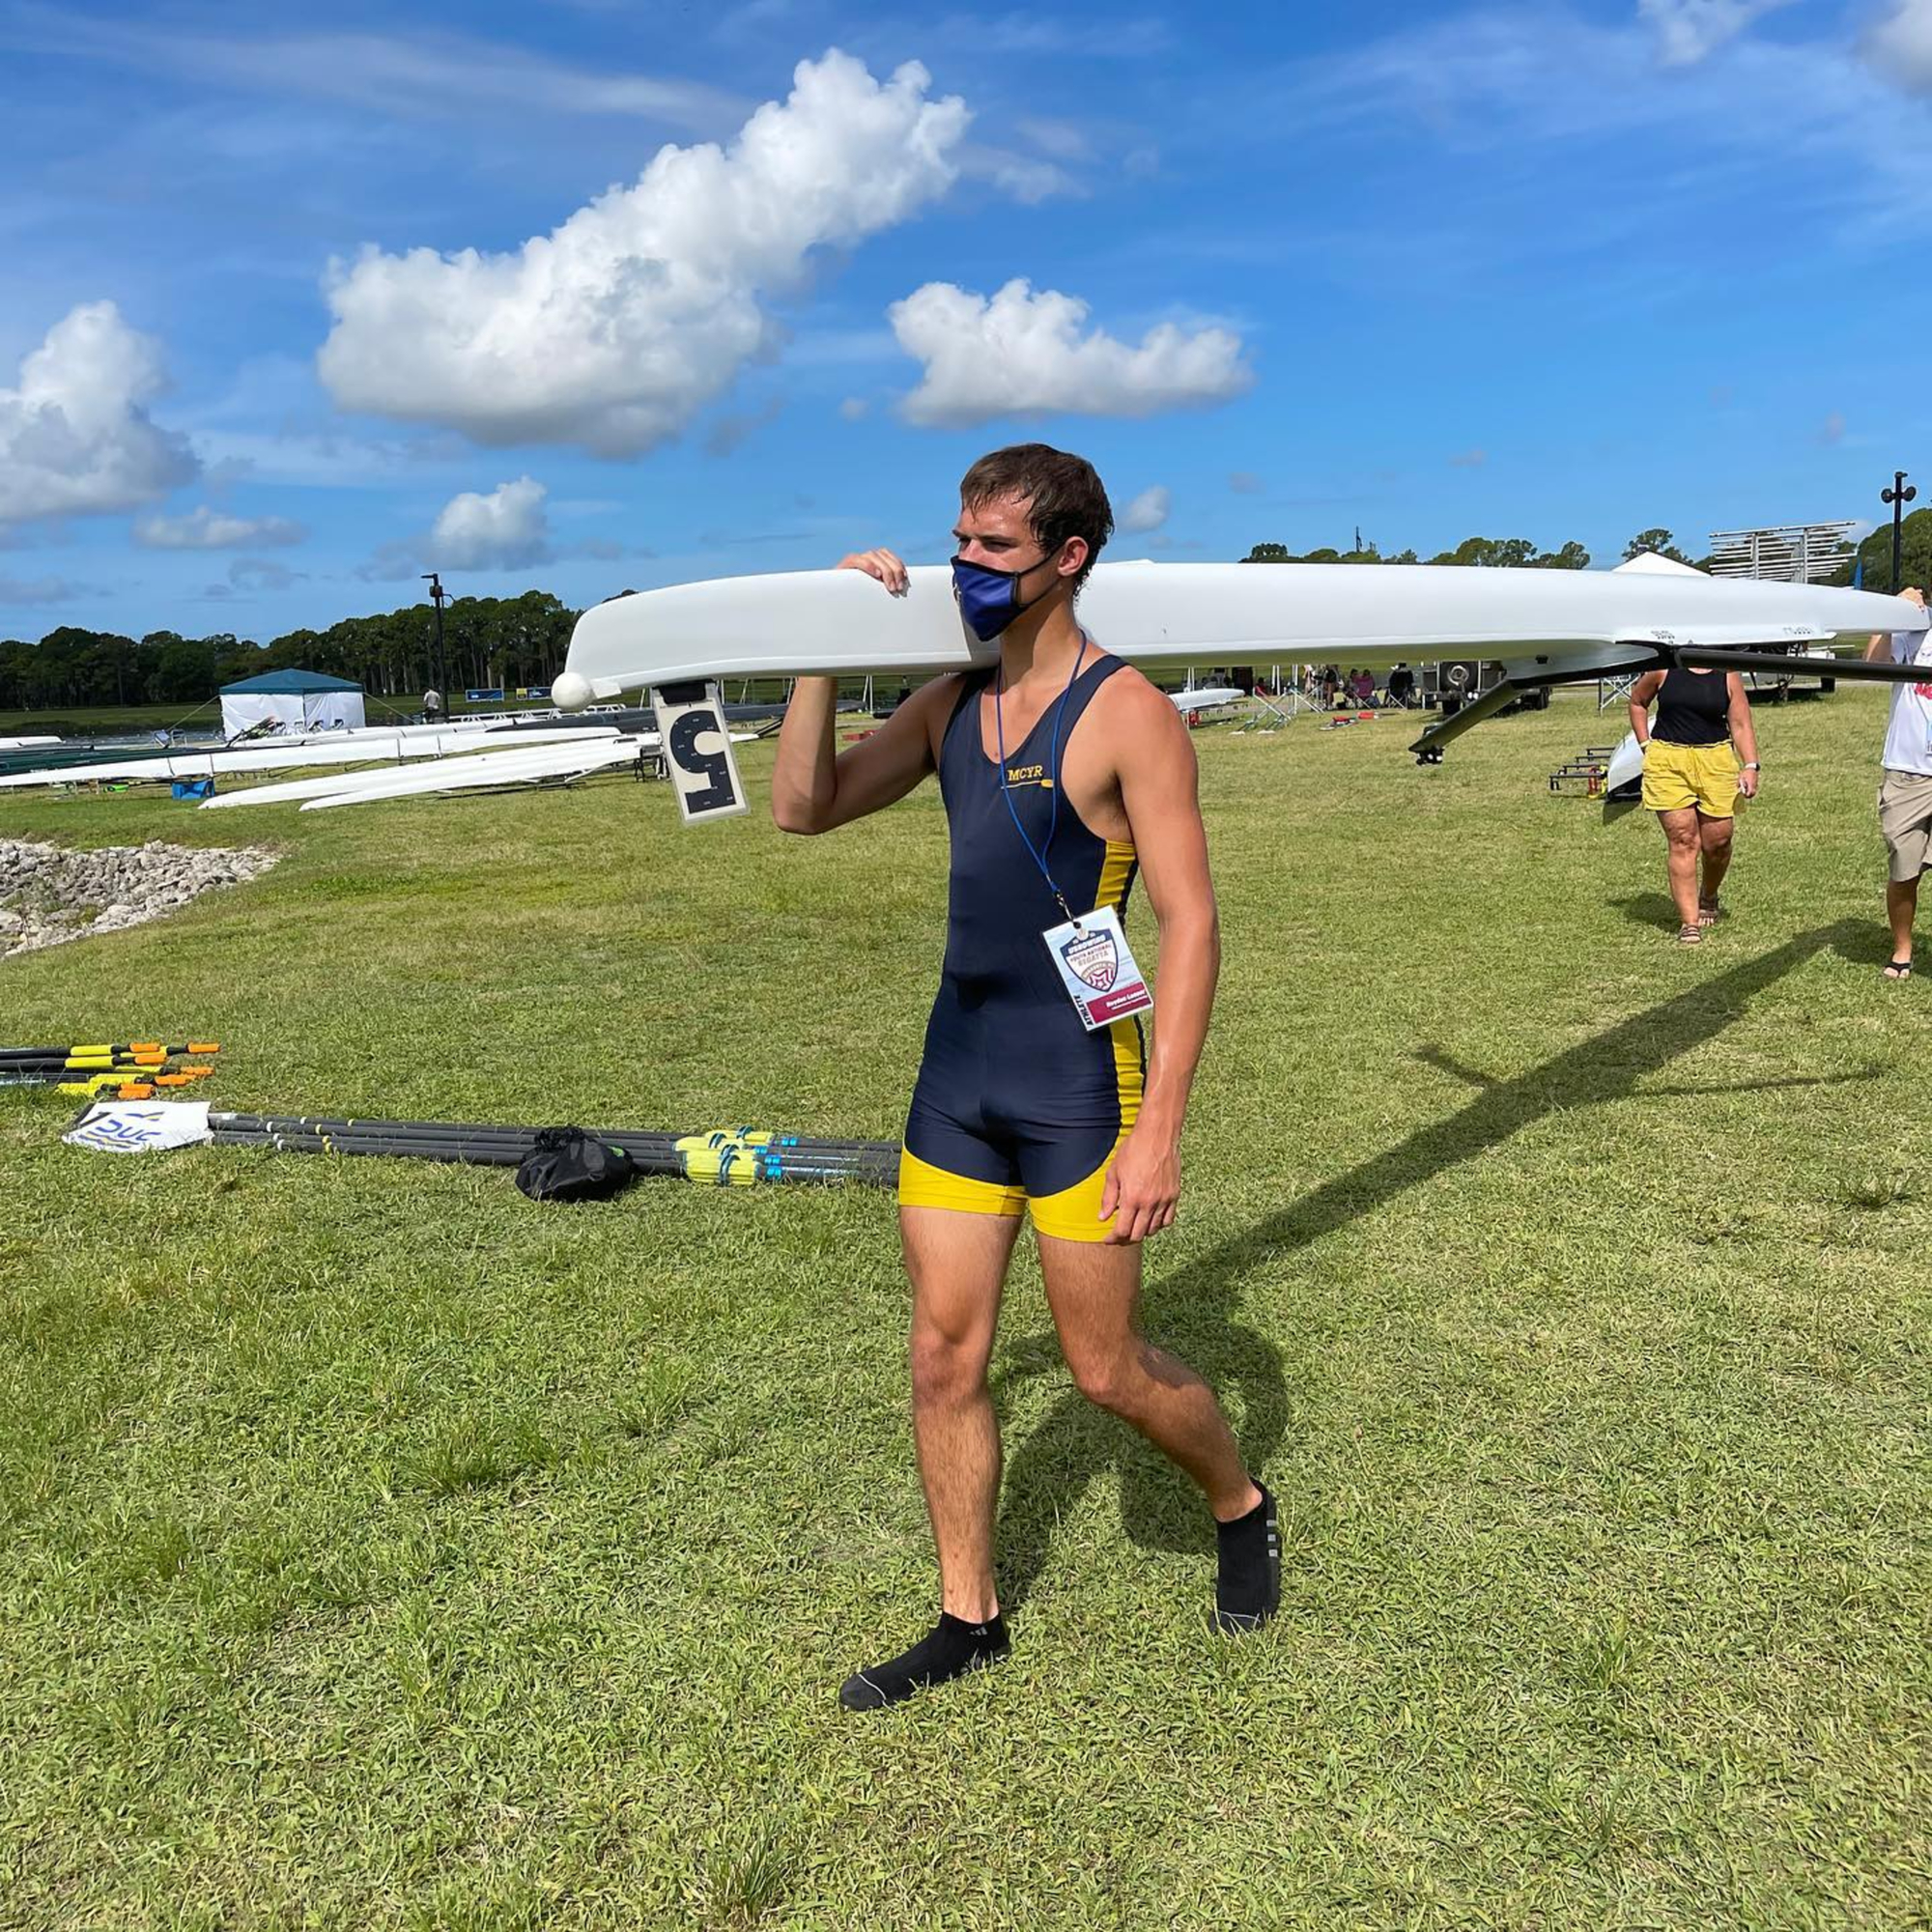 MCYR's Hayden Lesser finished ninth overall in the U17 Men's 1X at the 2021 USRowing Youth National Regatta. Photo courtesy MCYR.